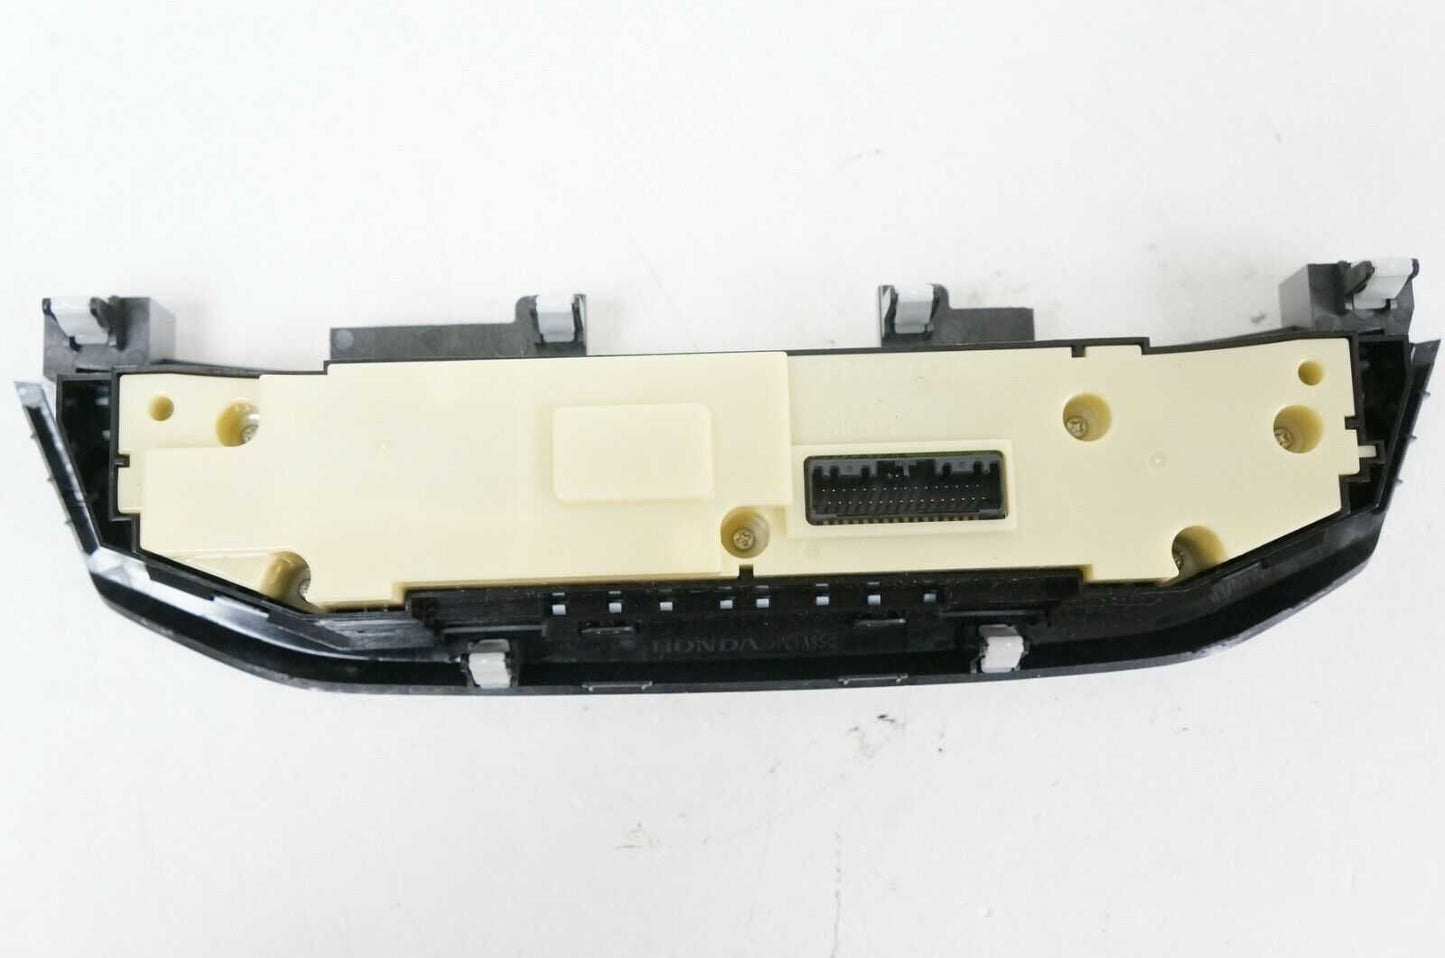 2014 Honda Accord Factory AC Heat Climate Control ID 79600 T2F A611 M1 OEM Alshned Auto Parts